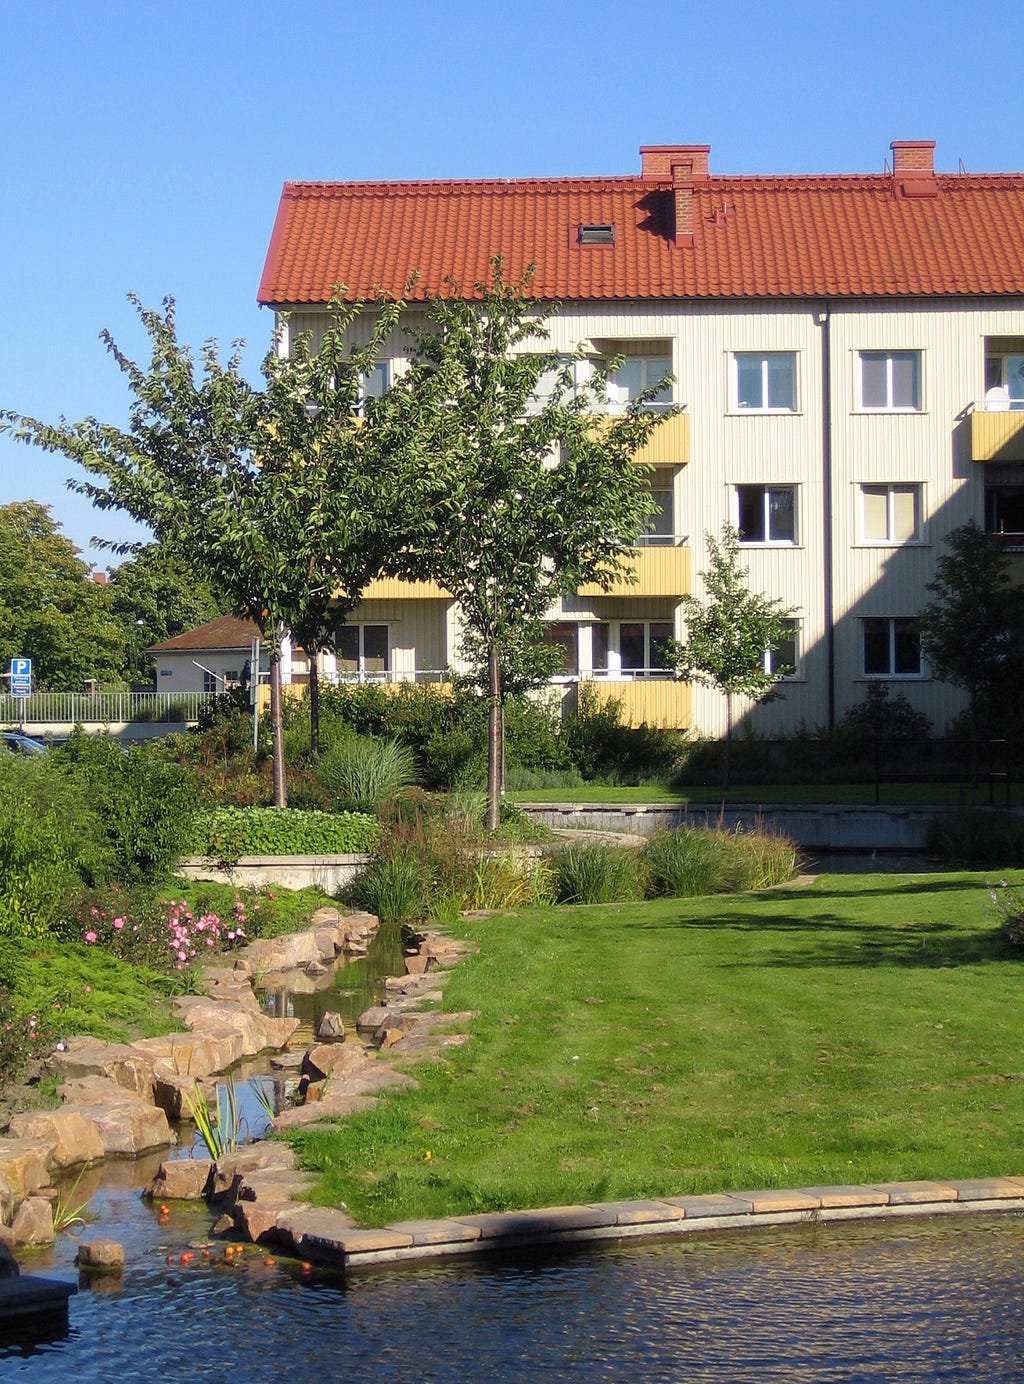 A block of flats surrounded by green and a small river. Urban stormwater management in Augustenborg, Malmö.